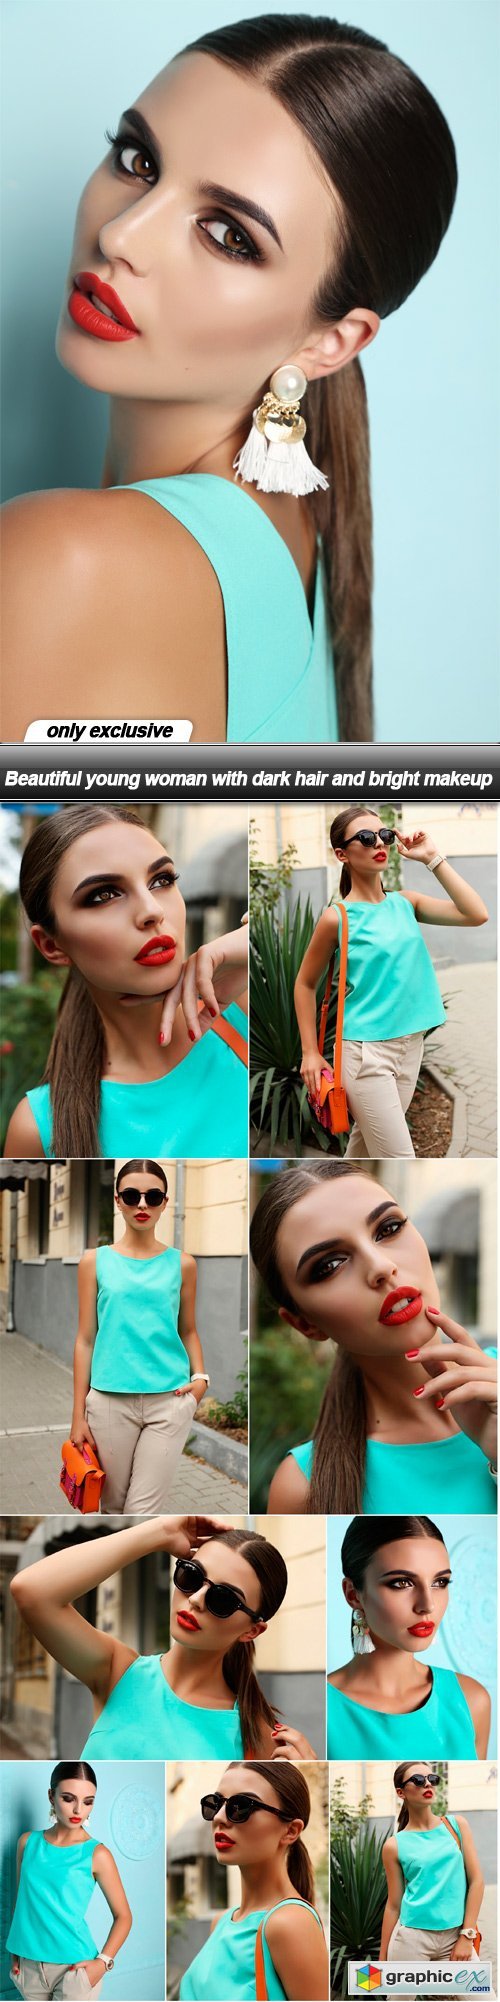 Beautiful young woman with dark hair and bright makeup - 10 UHQ JPEG